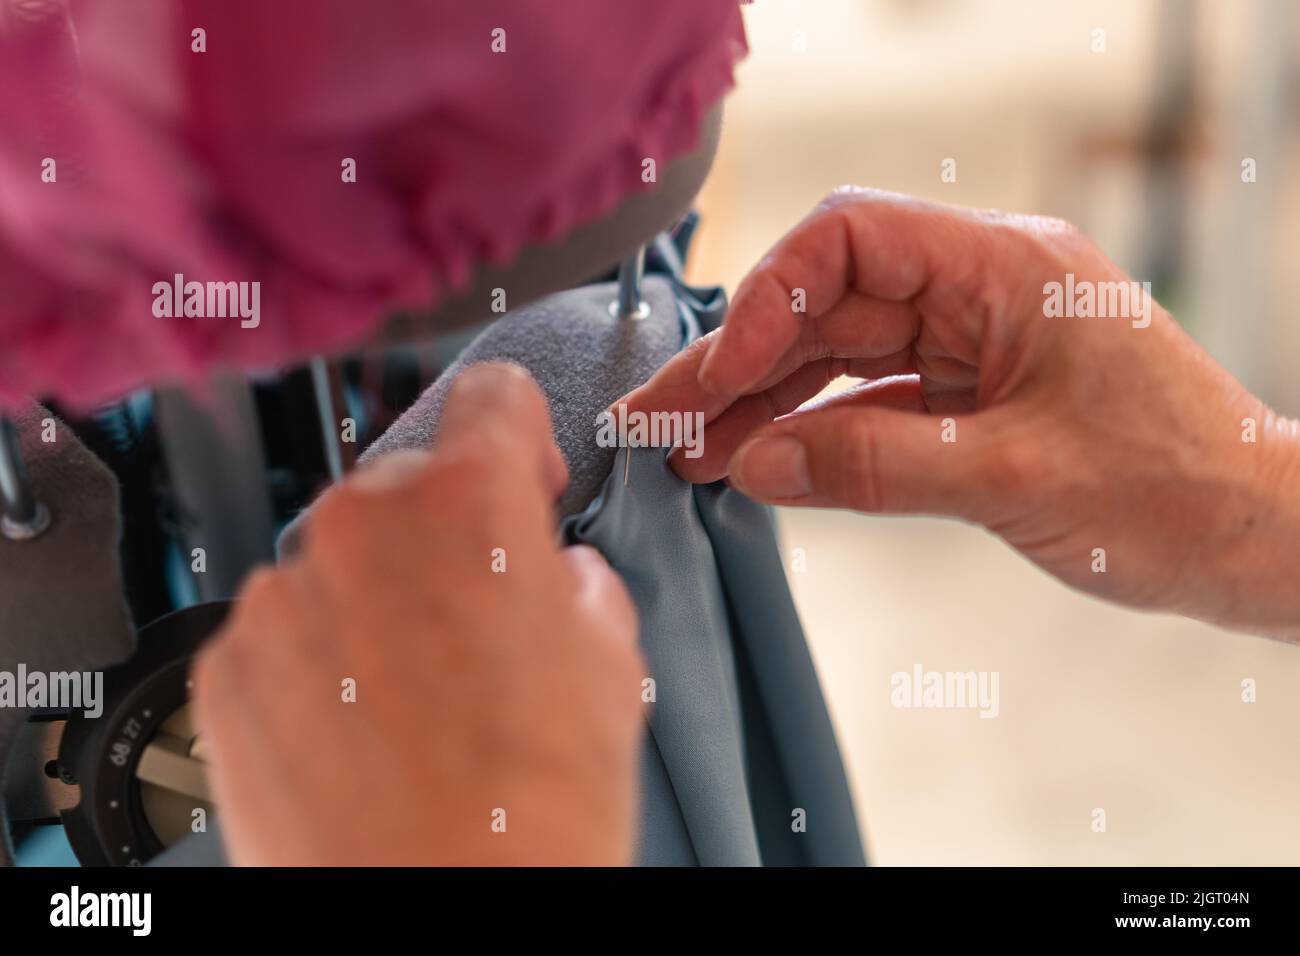 detail of the hands of a seamstress attaching a garment to a mannequin with a pin Stock Photo